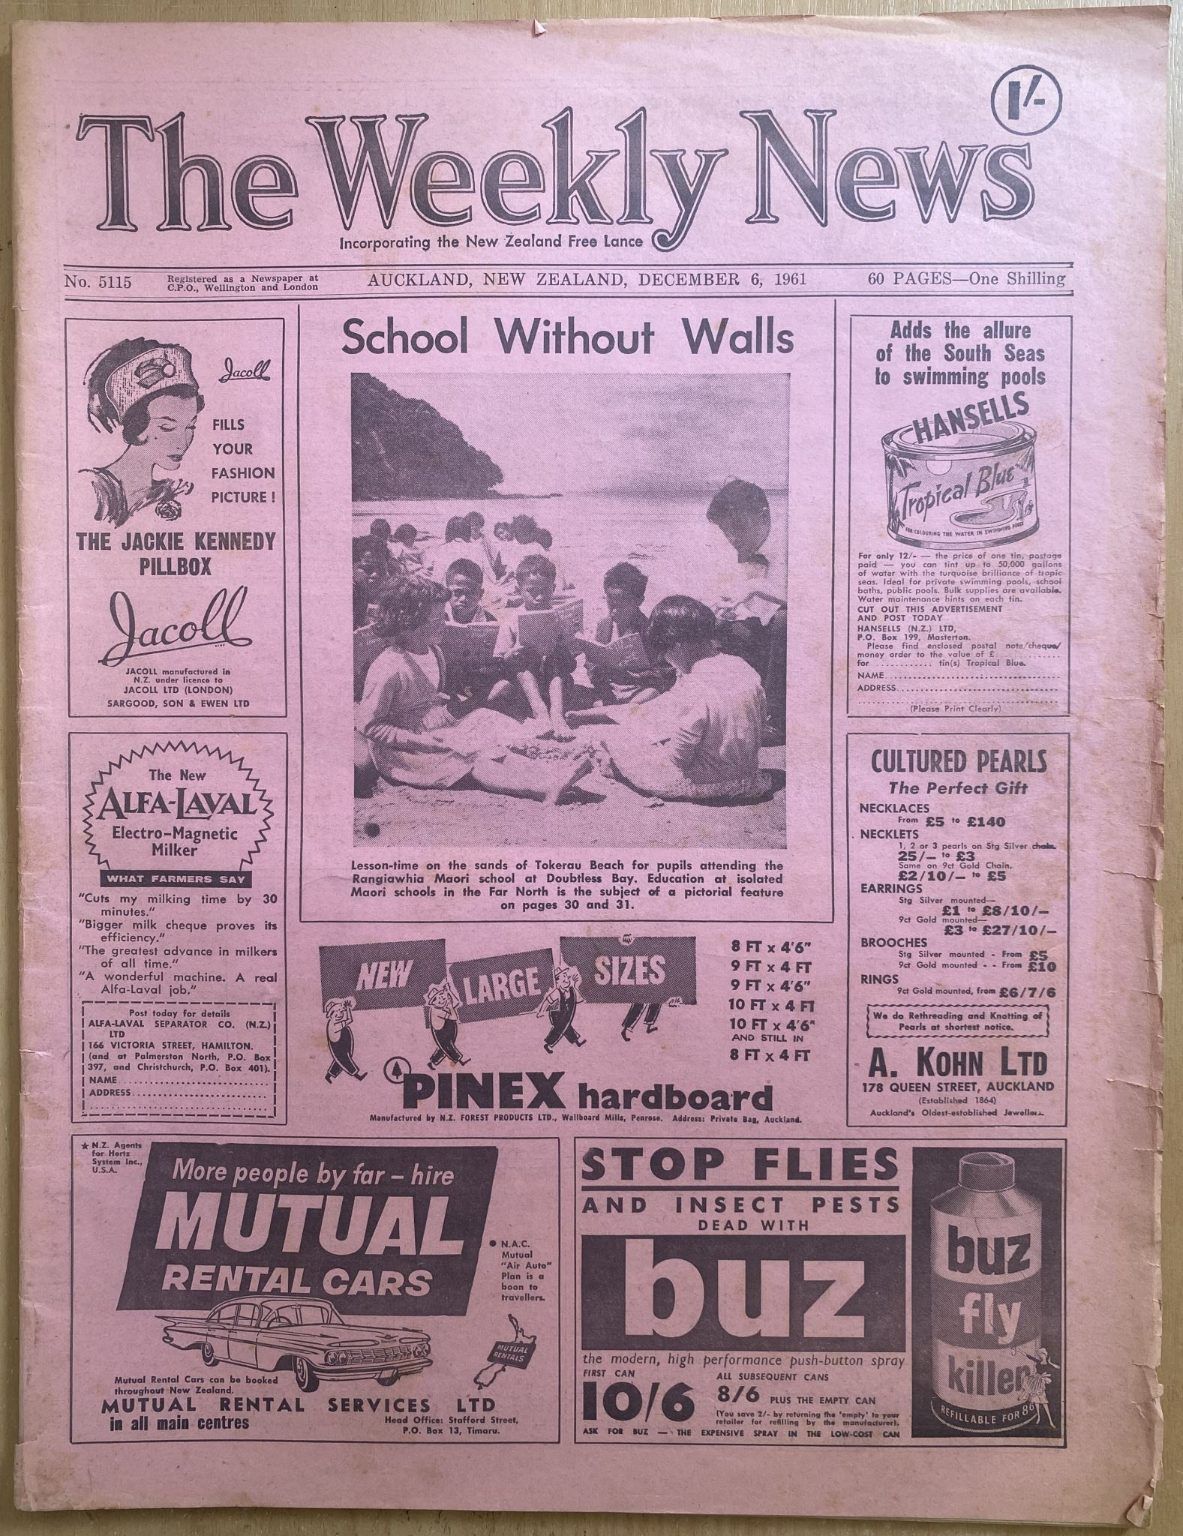 OLD NEWSPAPER: The Weekly News - No. 5115, 6 December 1961